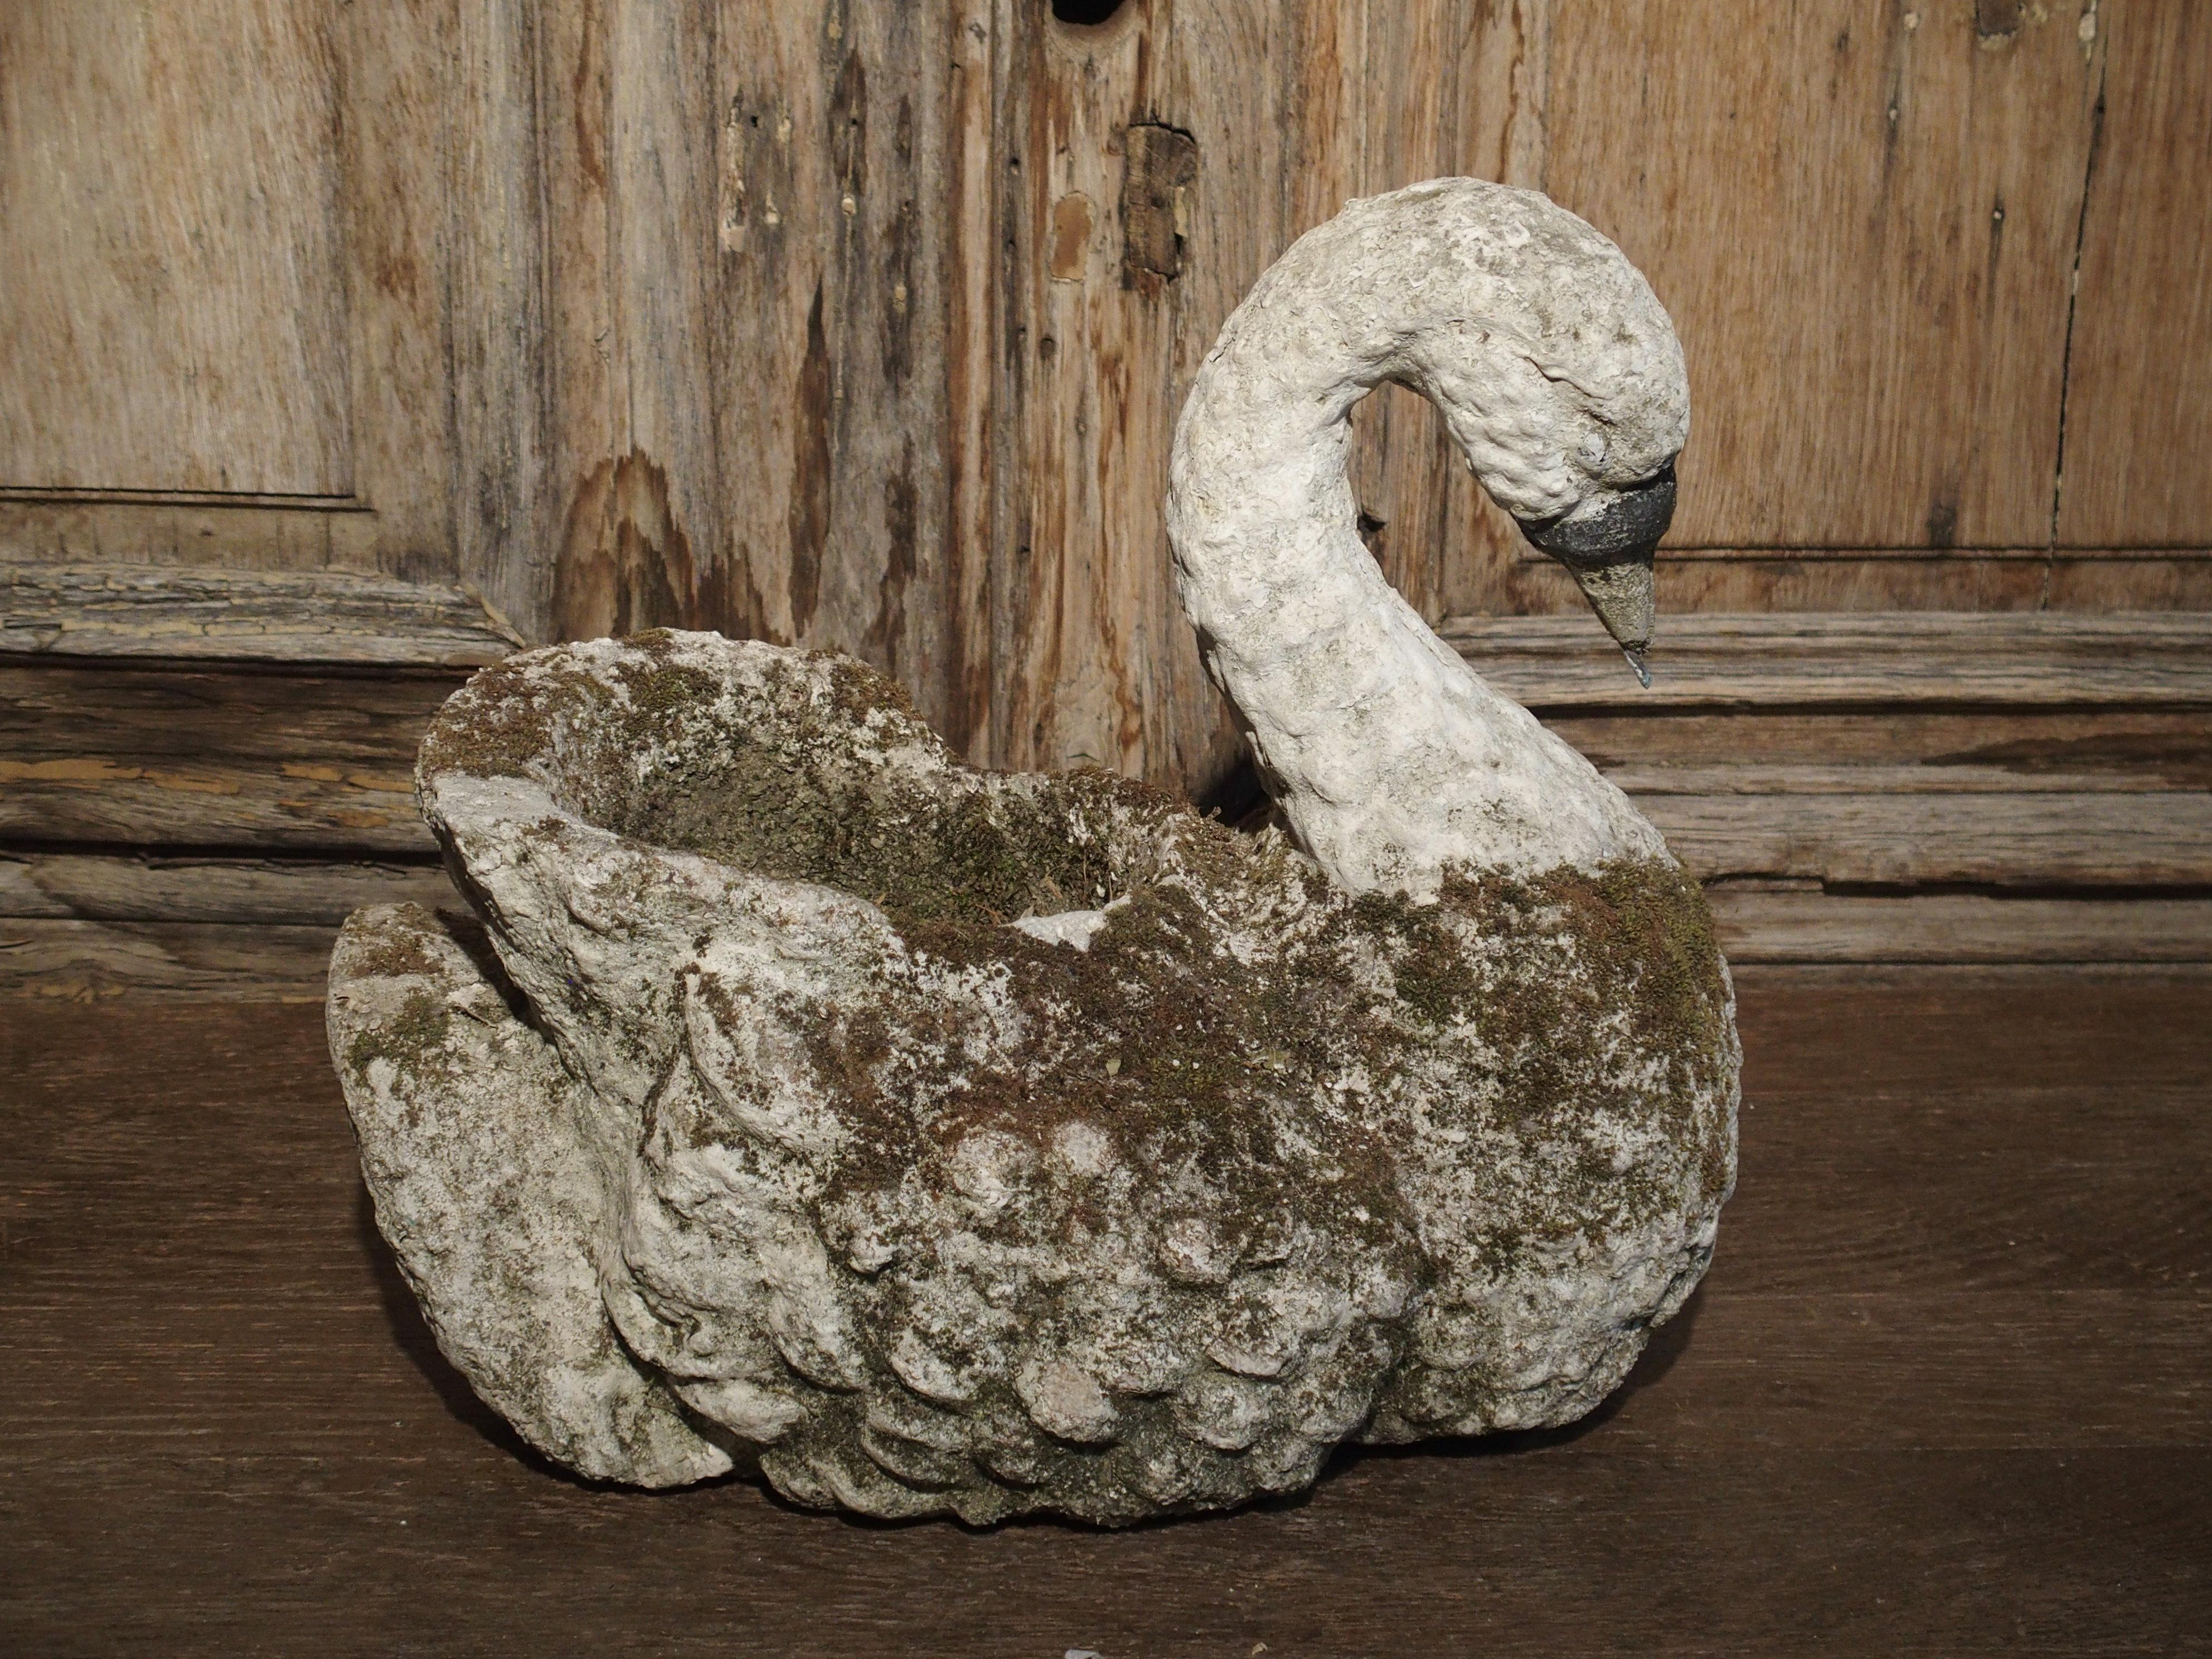 Swans are known to be elegant and graceful birds and this French swan planter no exception. It is midcentury and still retains some of its original paint finish. It is a cast reconstituted stone that will be perfect for a garden or sunroom.